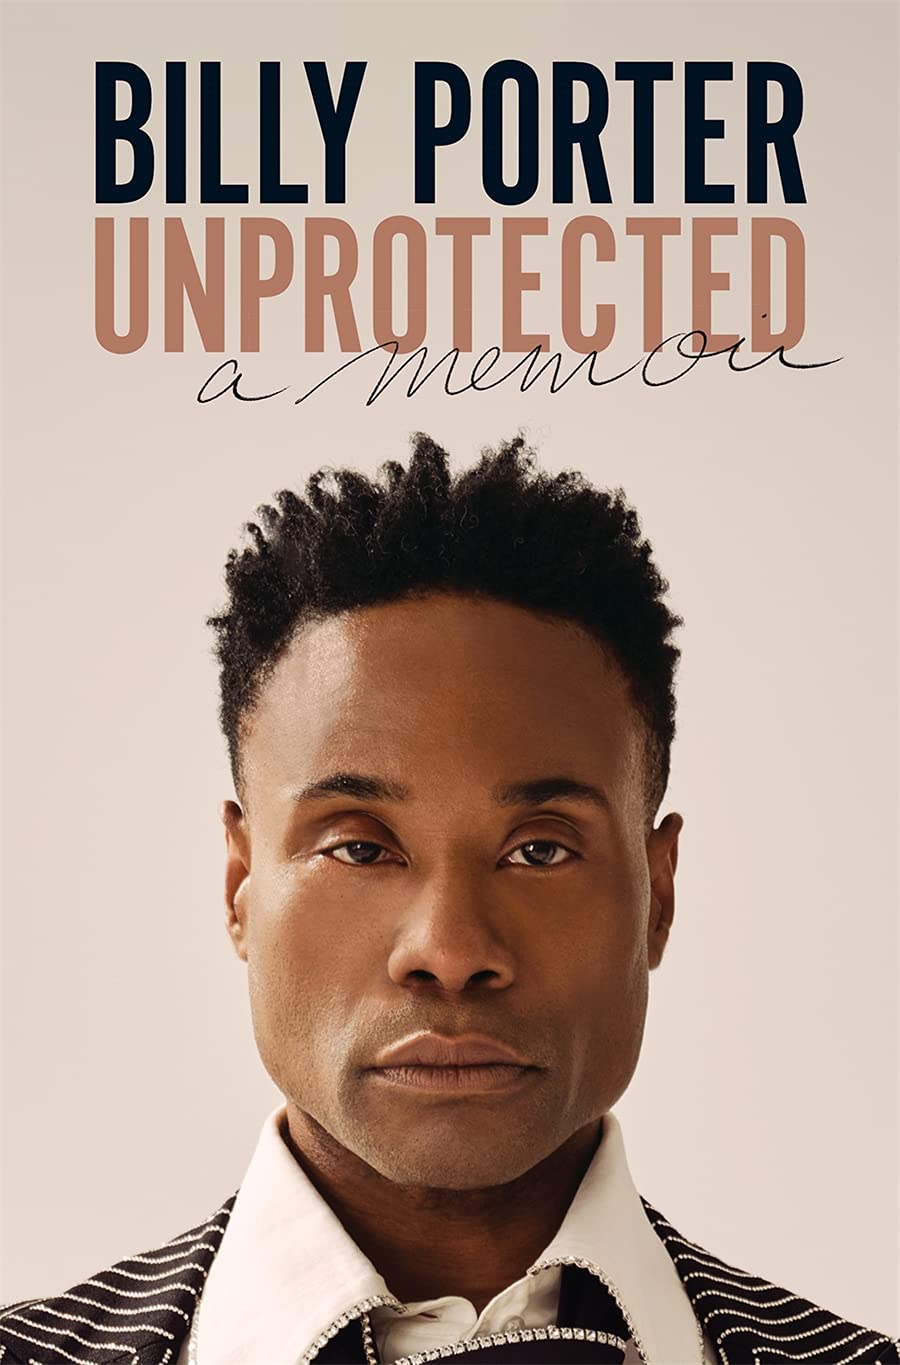 The cover of Unprotected